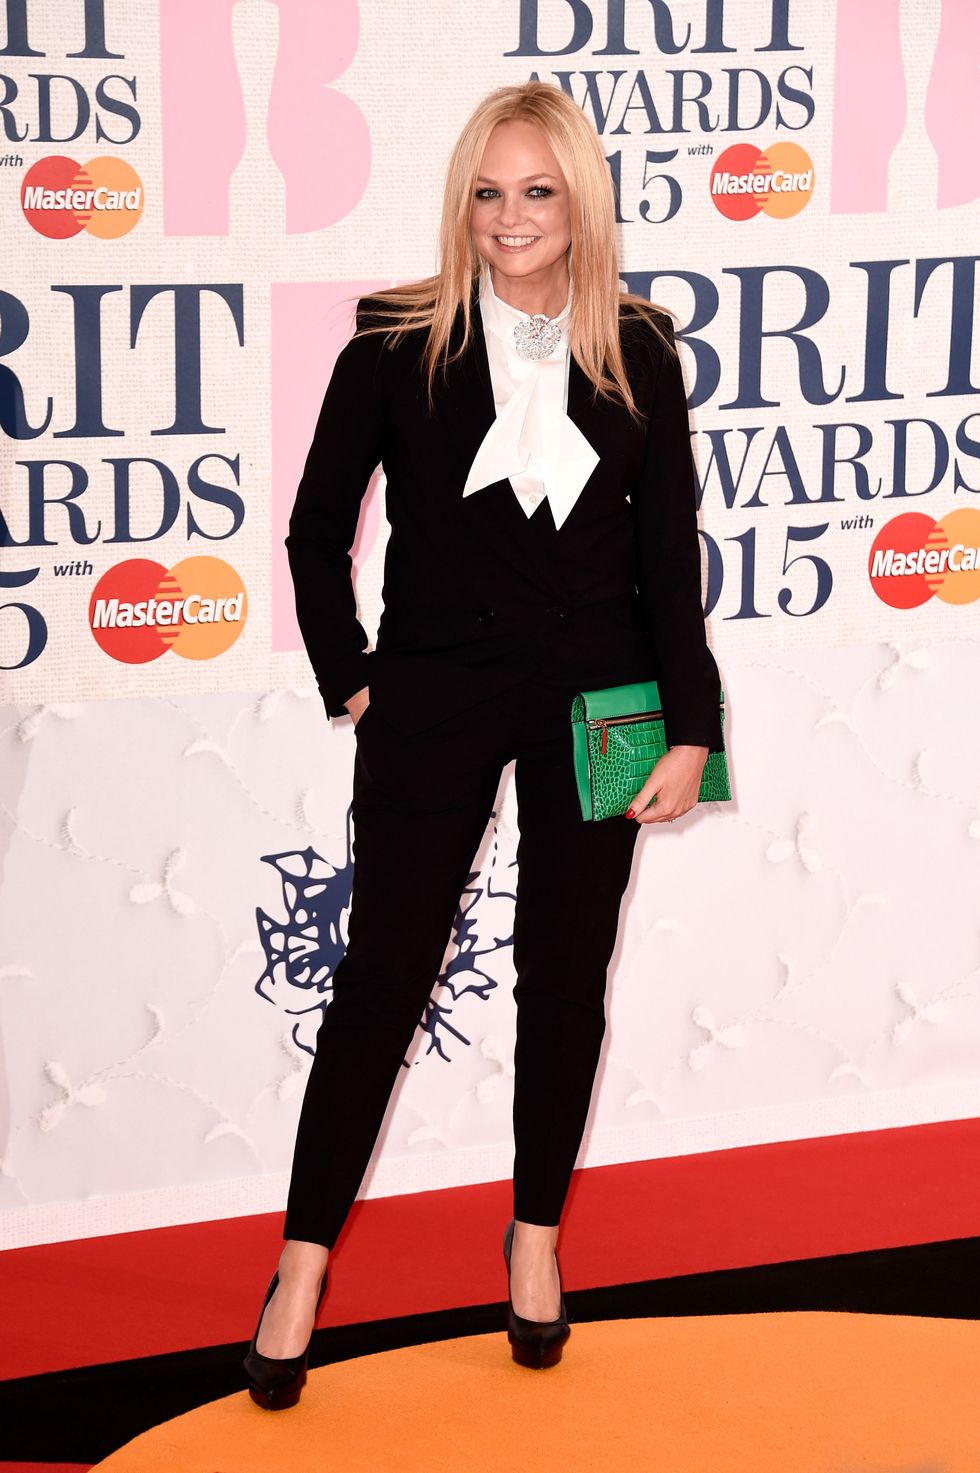 Emma Bunton wears a suit to the BRIT Awards 2015